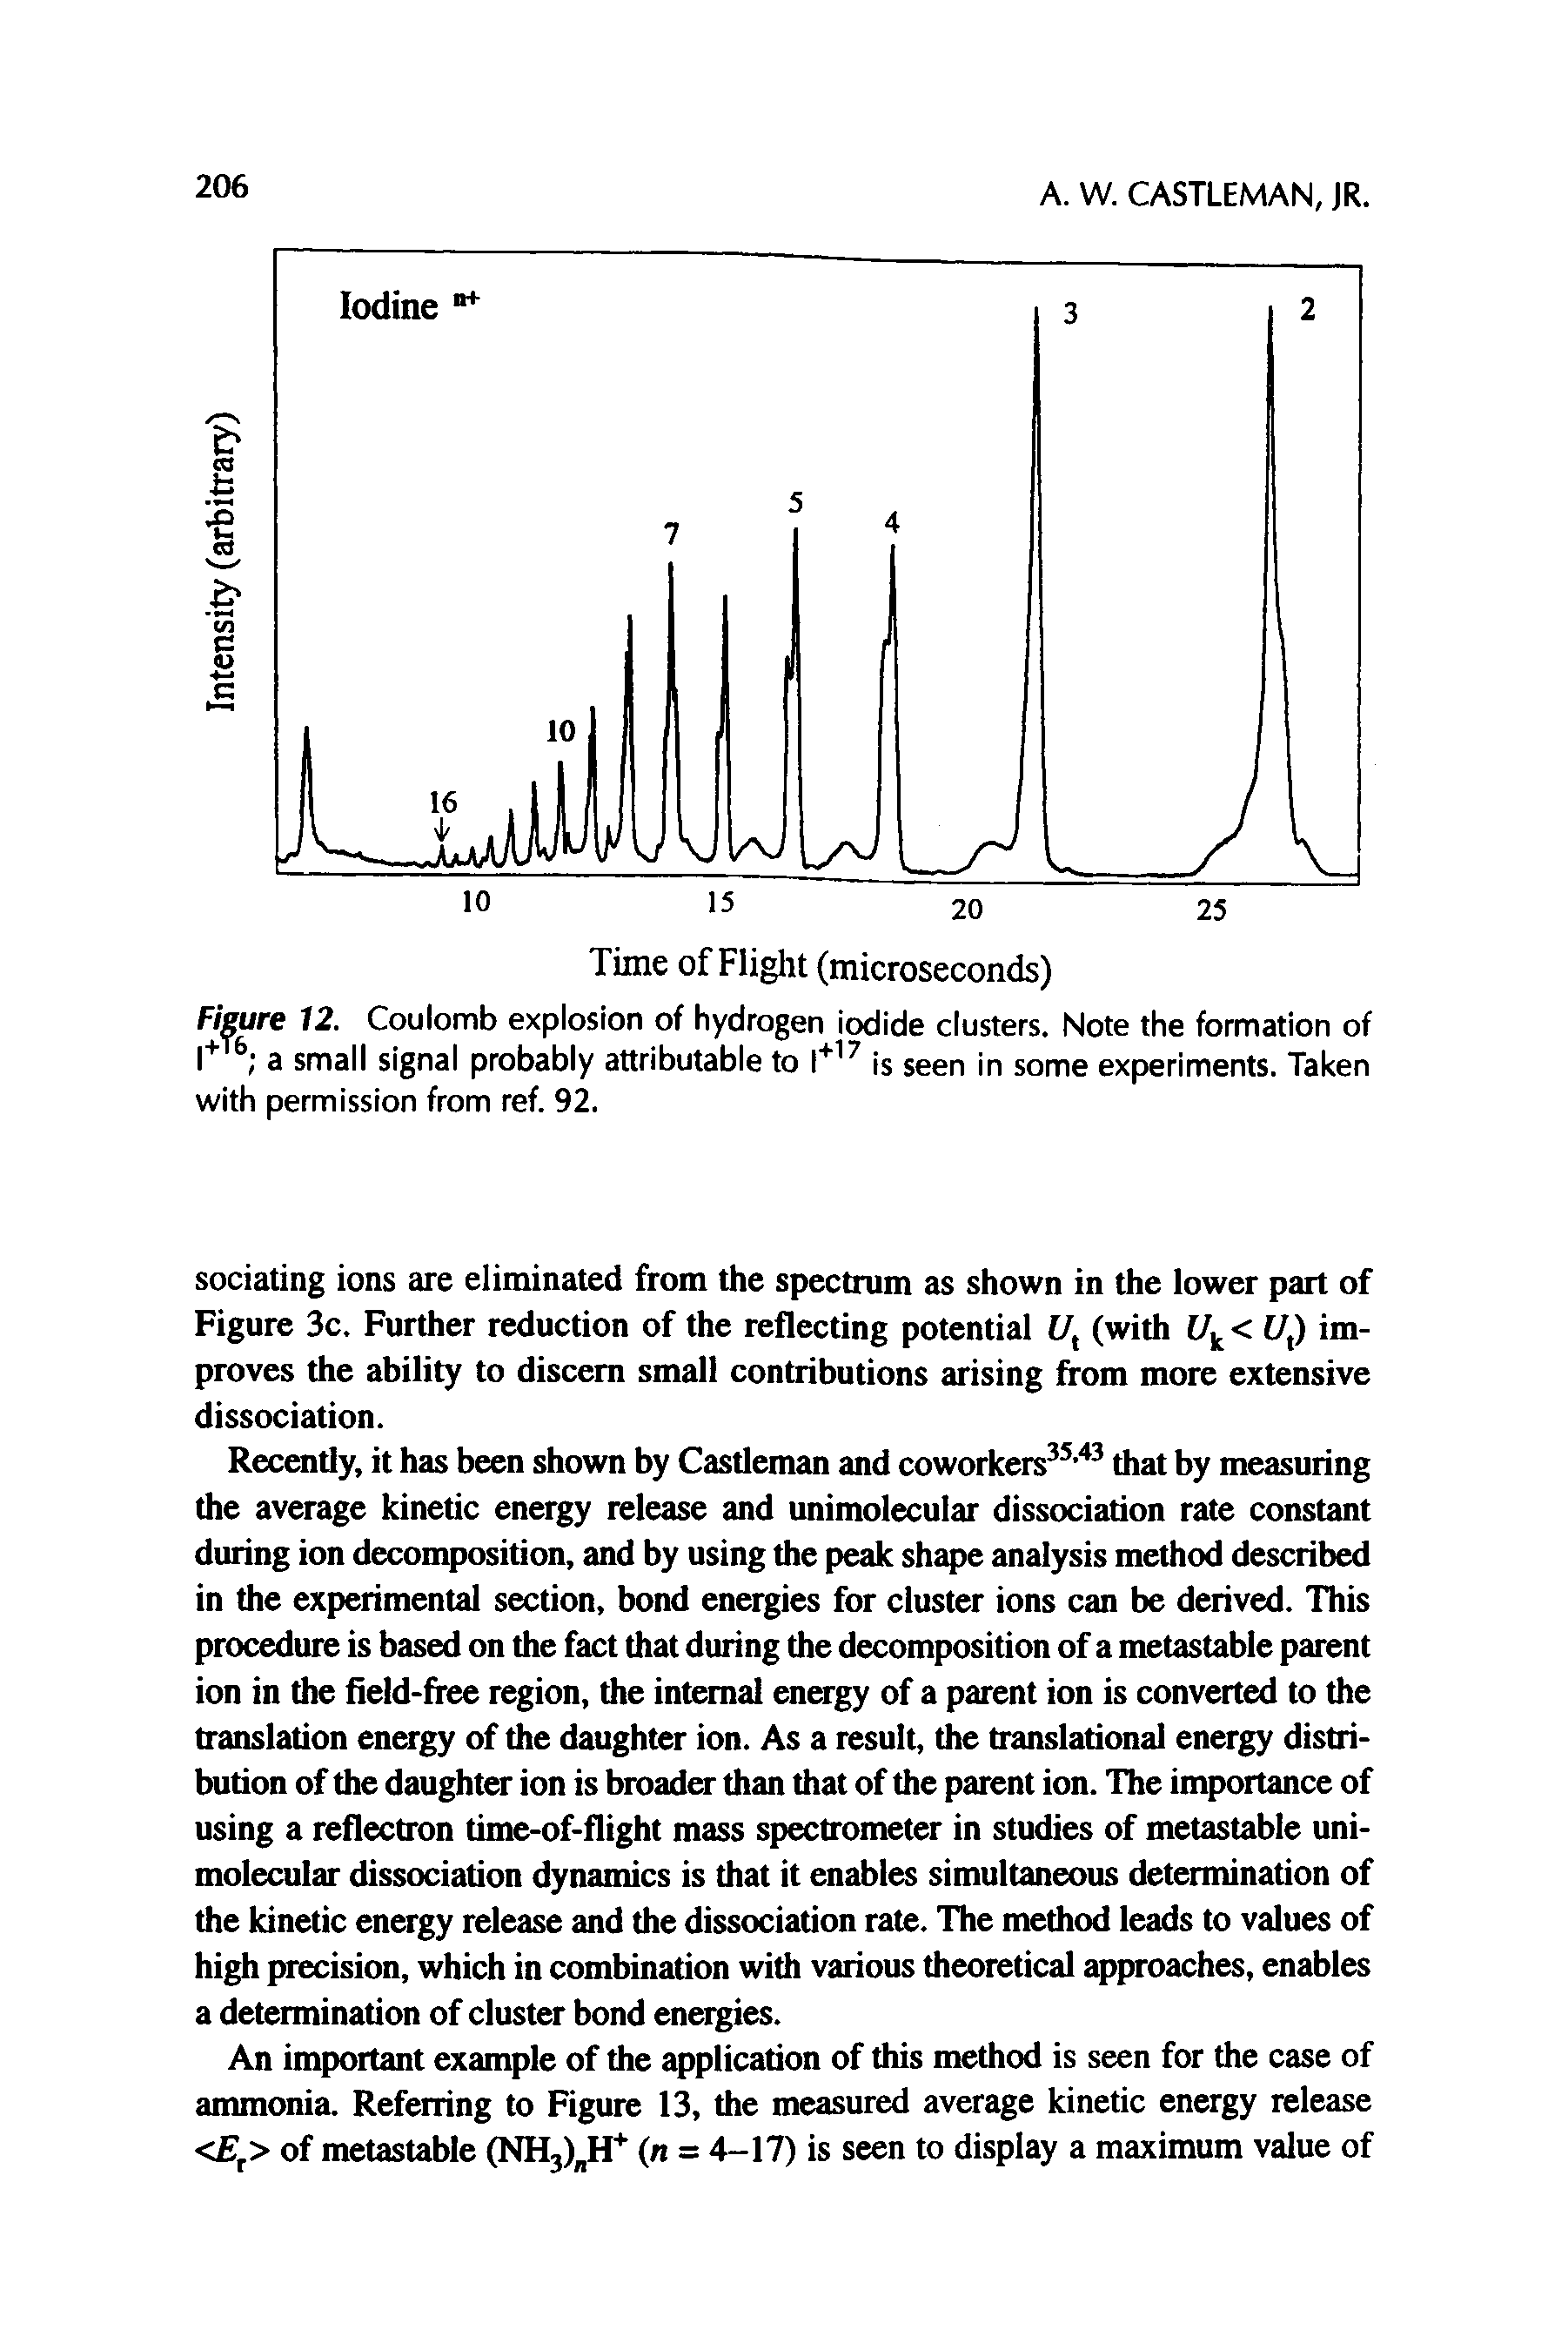 Figure 12. Coulomb explosion of hydrogen iodide clusters. Note the formation of l+ a small signal probably attributable to l+17 is seen in some experiments. Taken with permission from ref. 92.